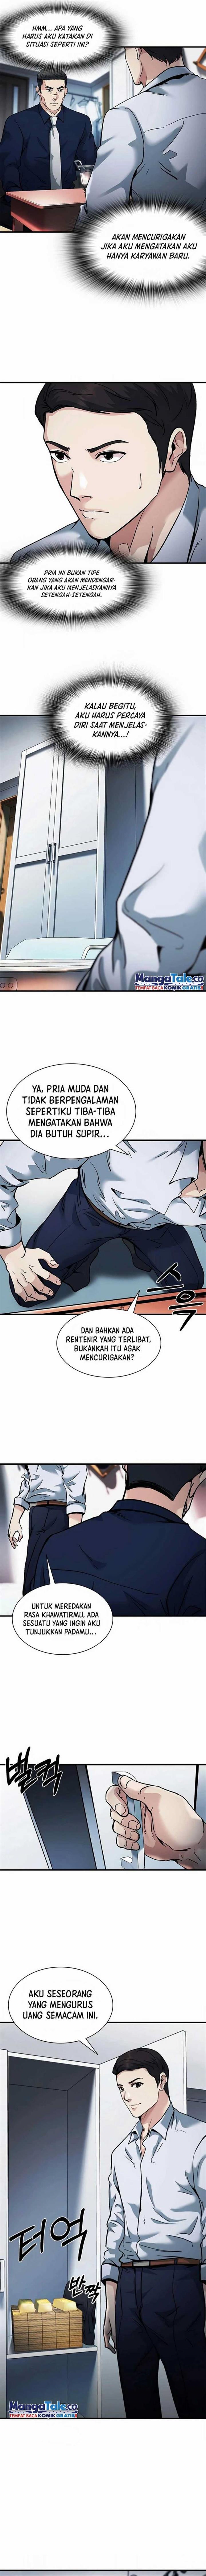 Chairman Kang, The New Employee Chapter 18